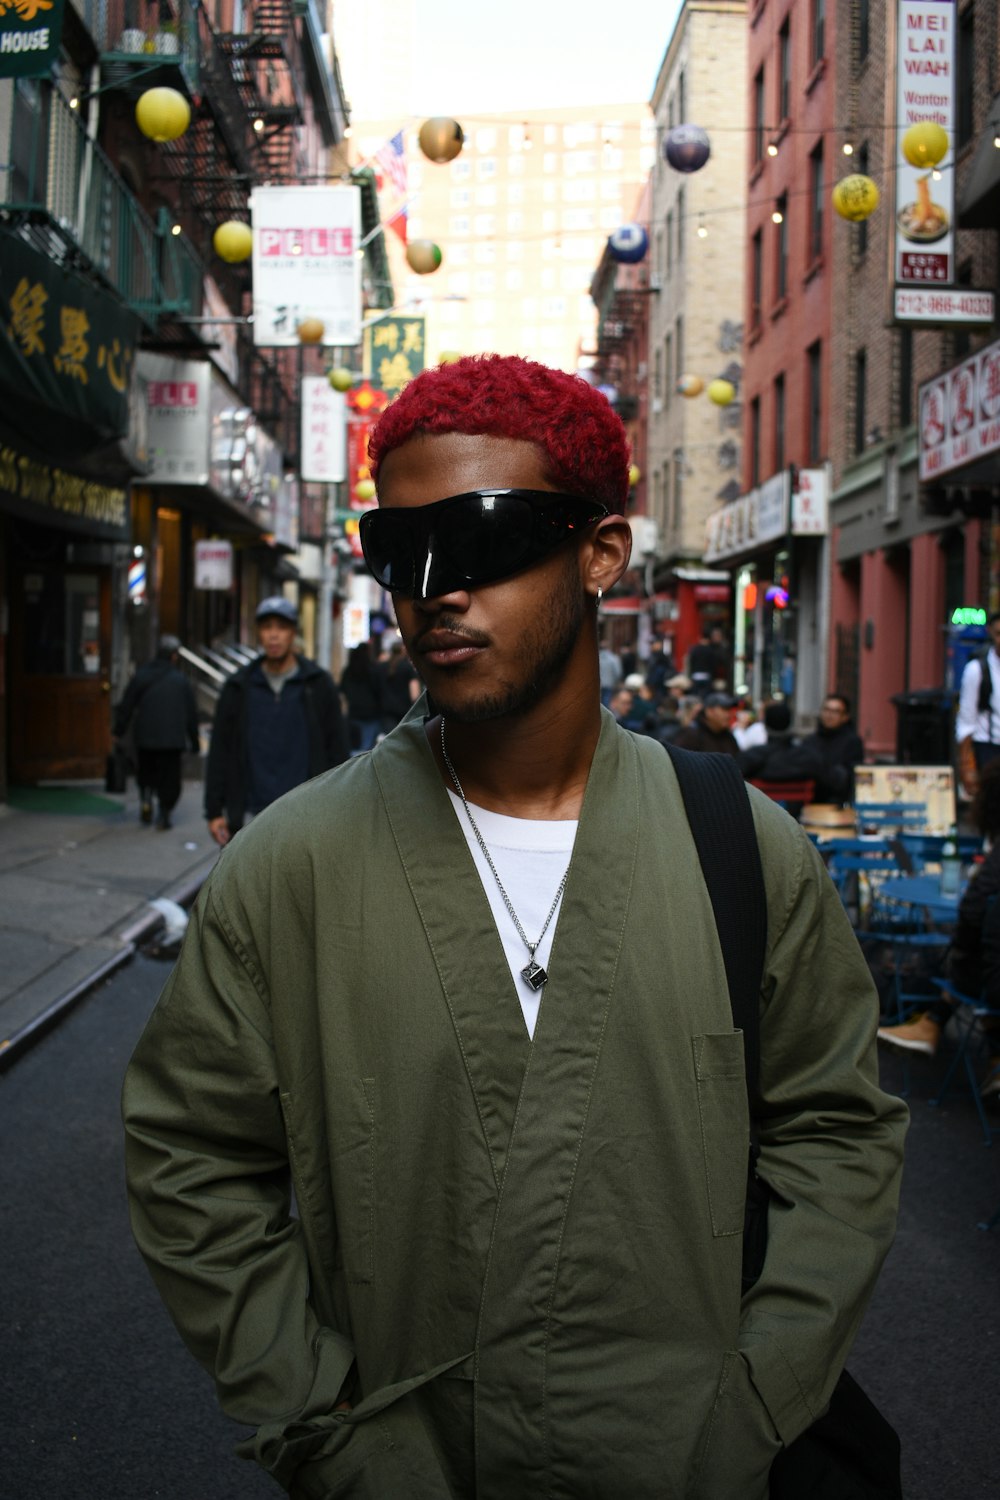 a man with a red hat and sunglasses standing in the middle of a street